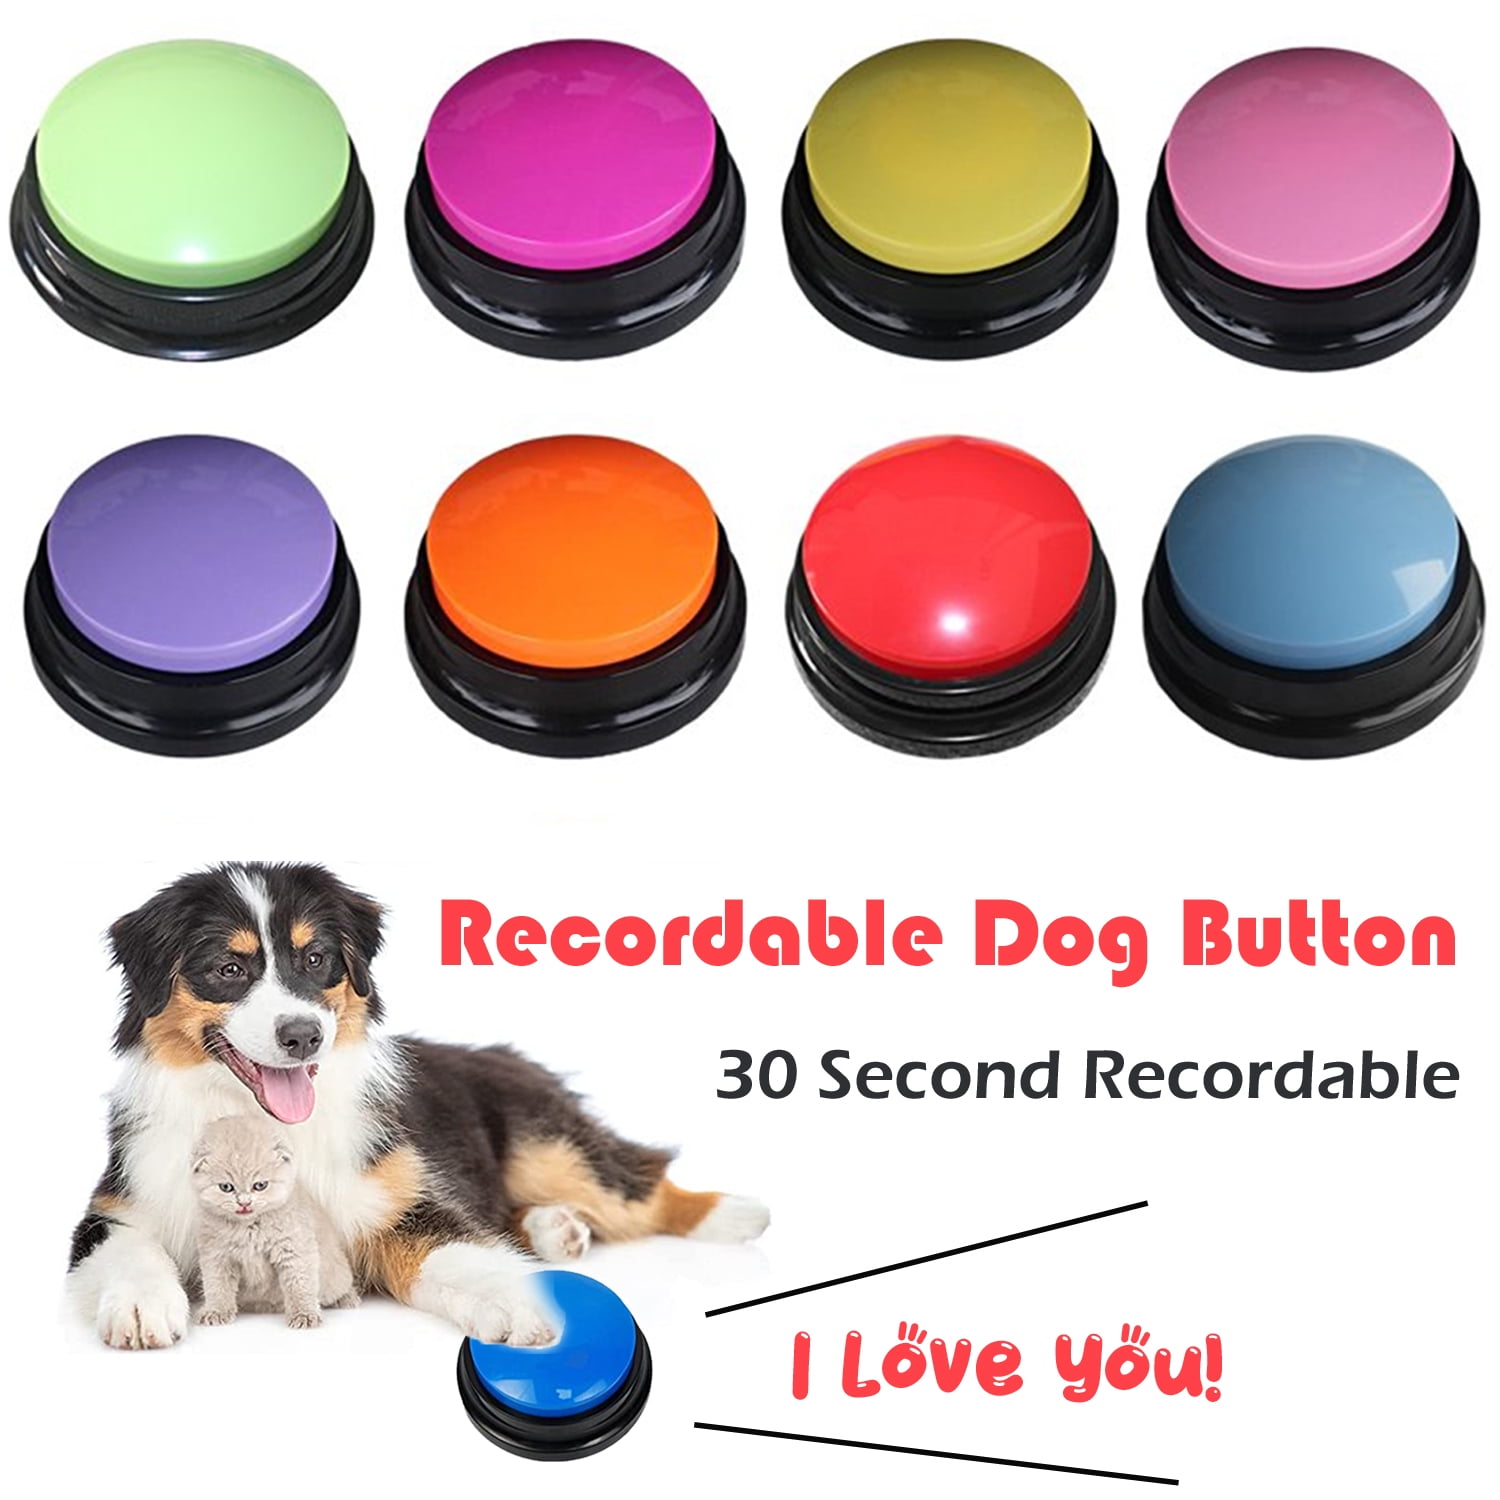 Recordable Dog Training Buttons Pet Talking Toys Pet Interac - Inspire  Uplift